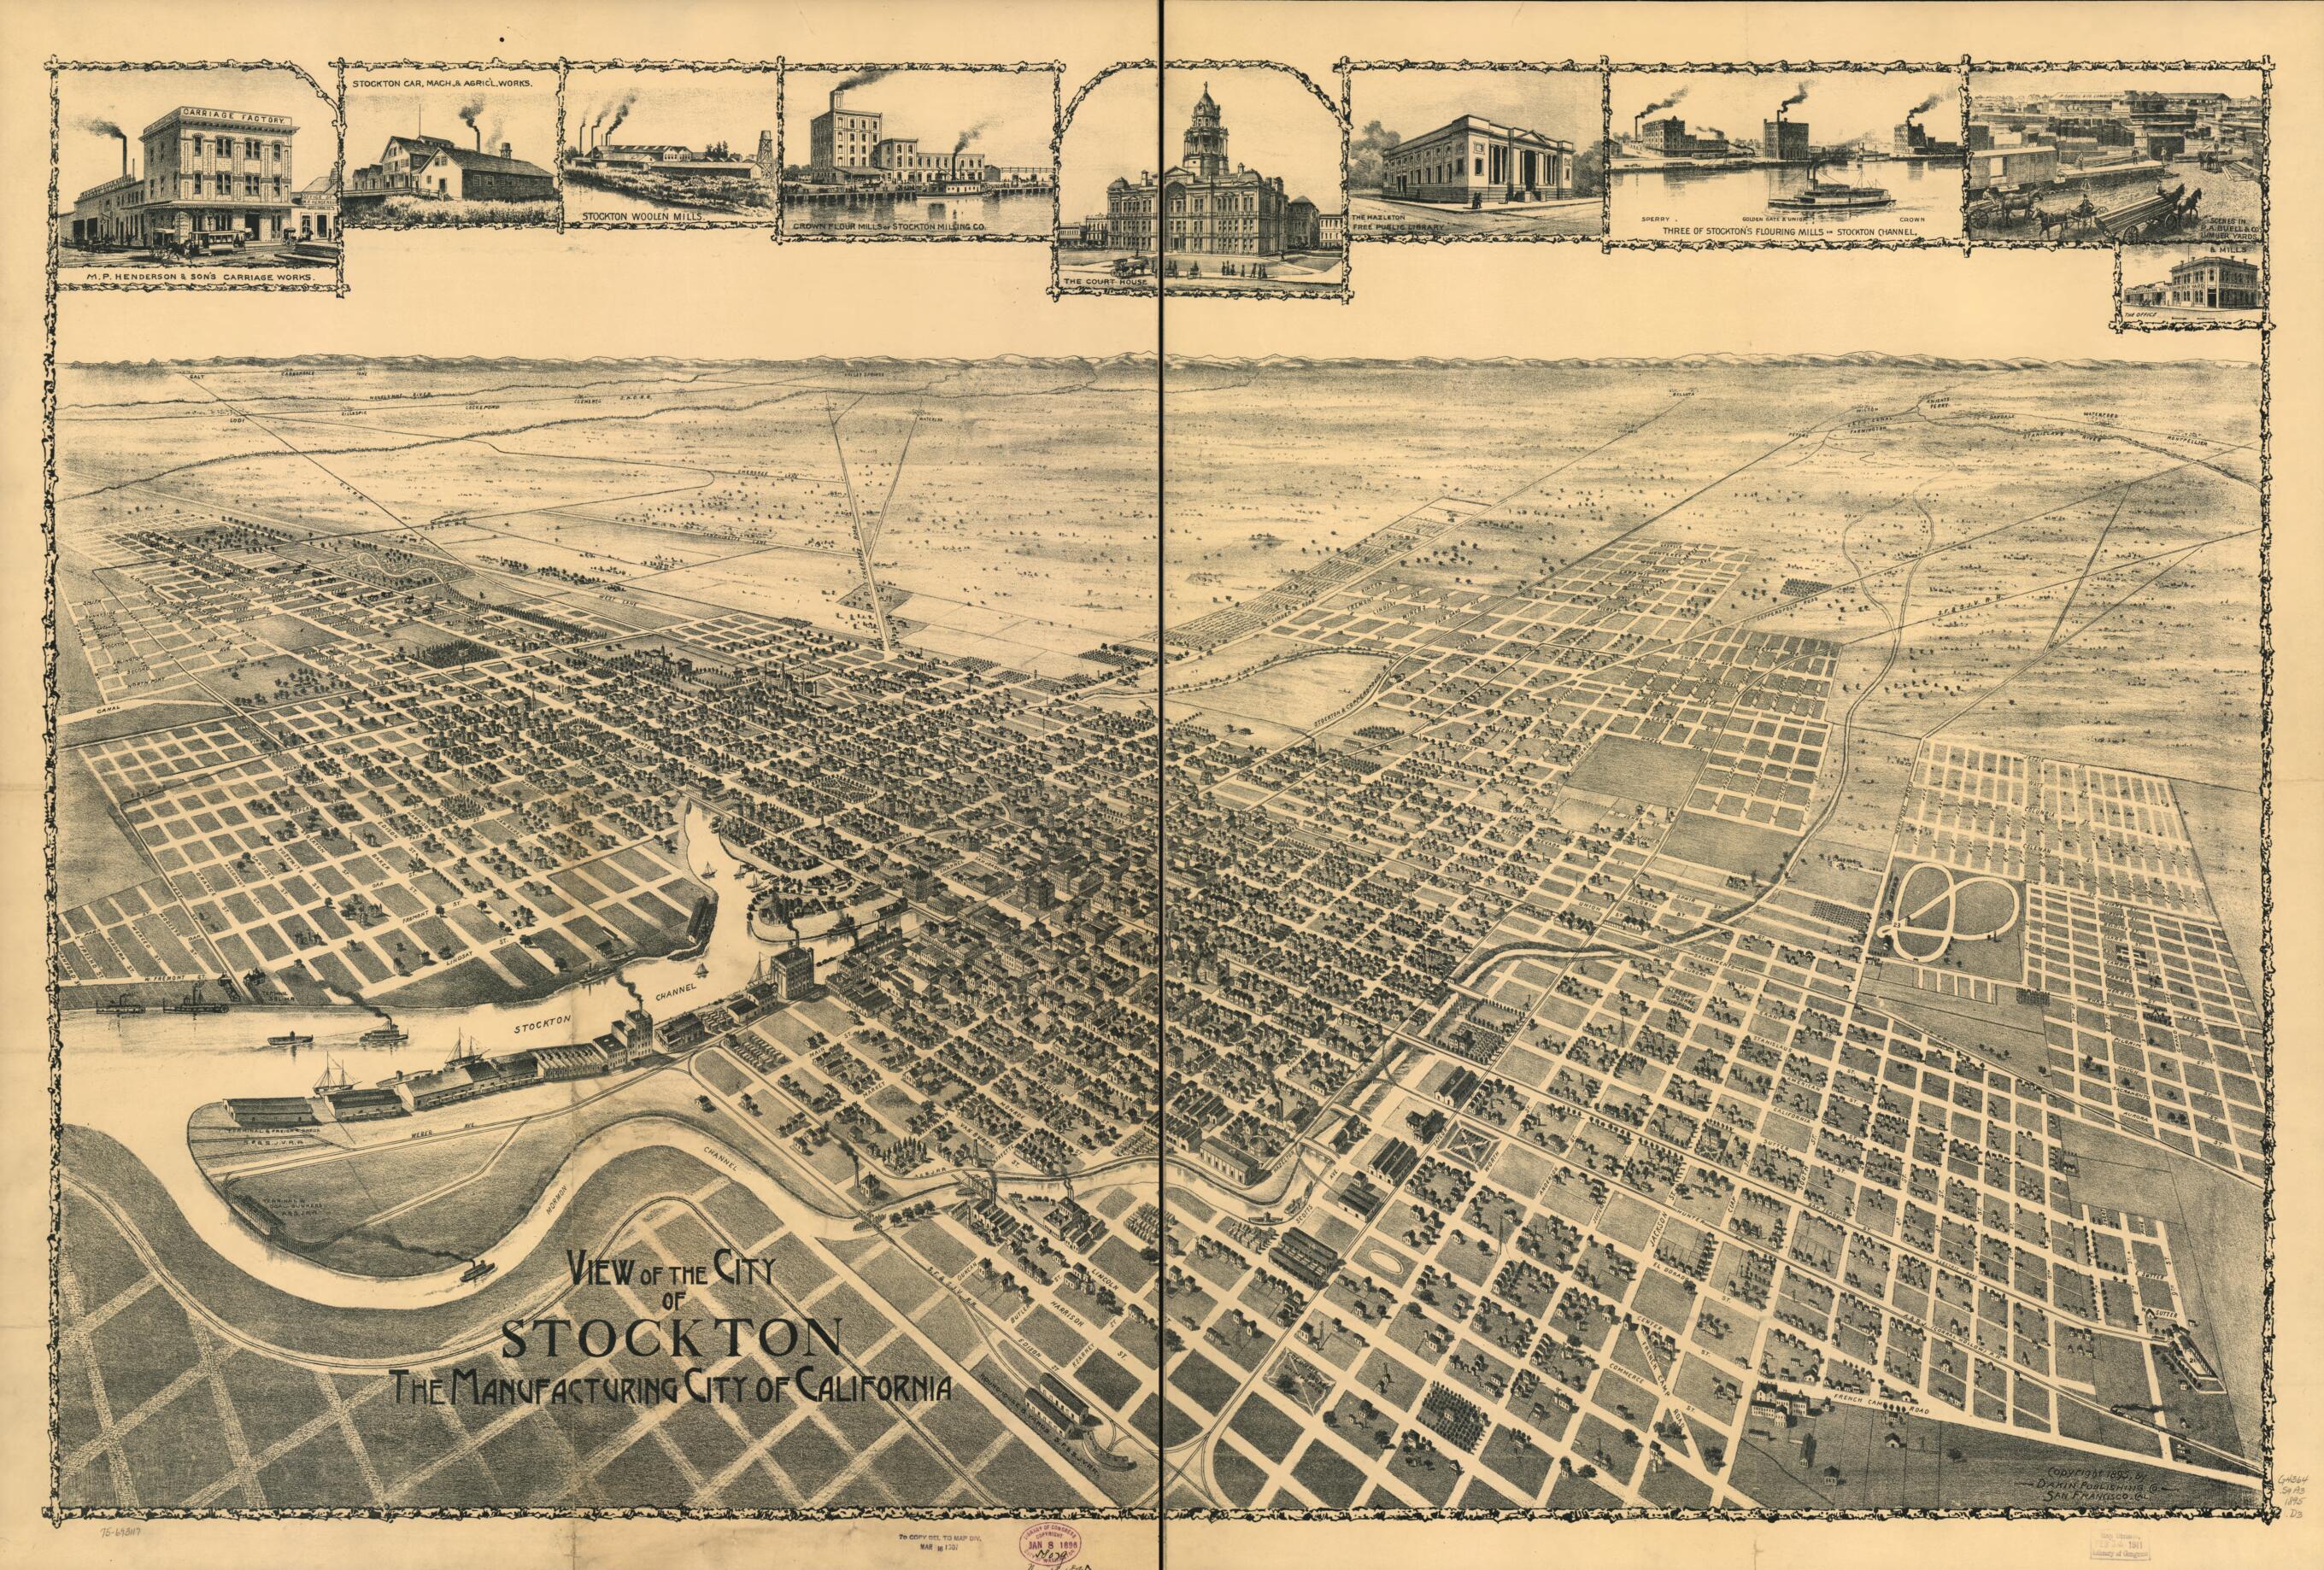 This old map of View of City of Stockton, the Manufacturing City of California from 1895 was created by  Dakin Publishing Co in 1895